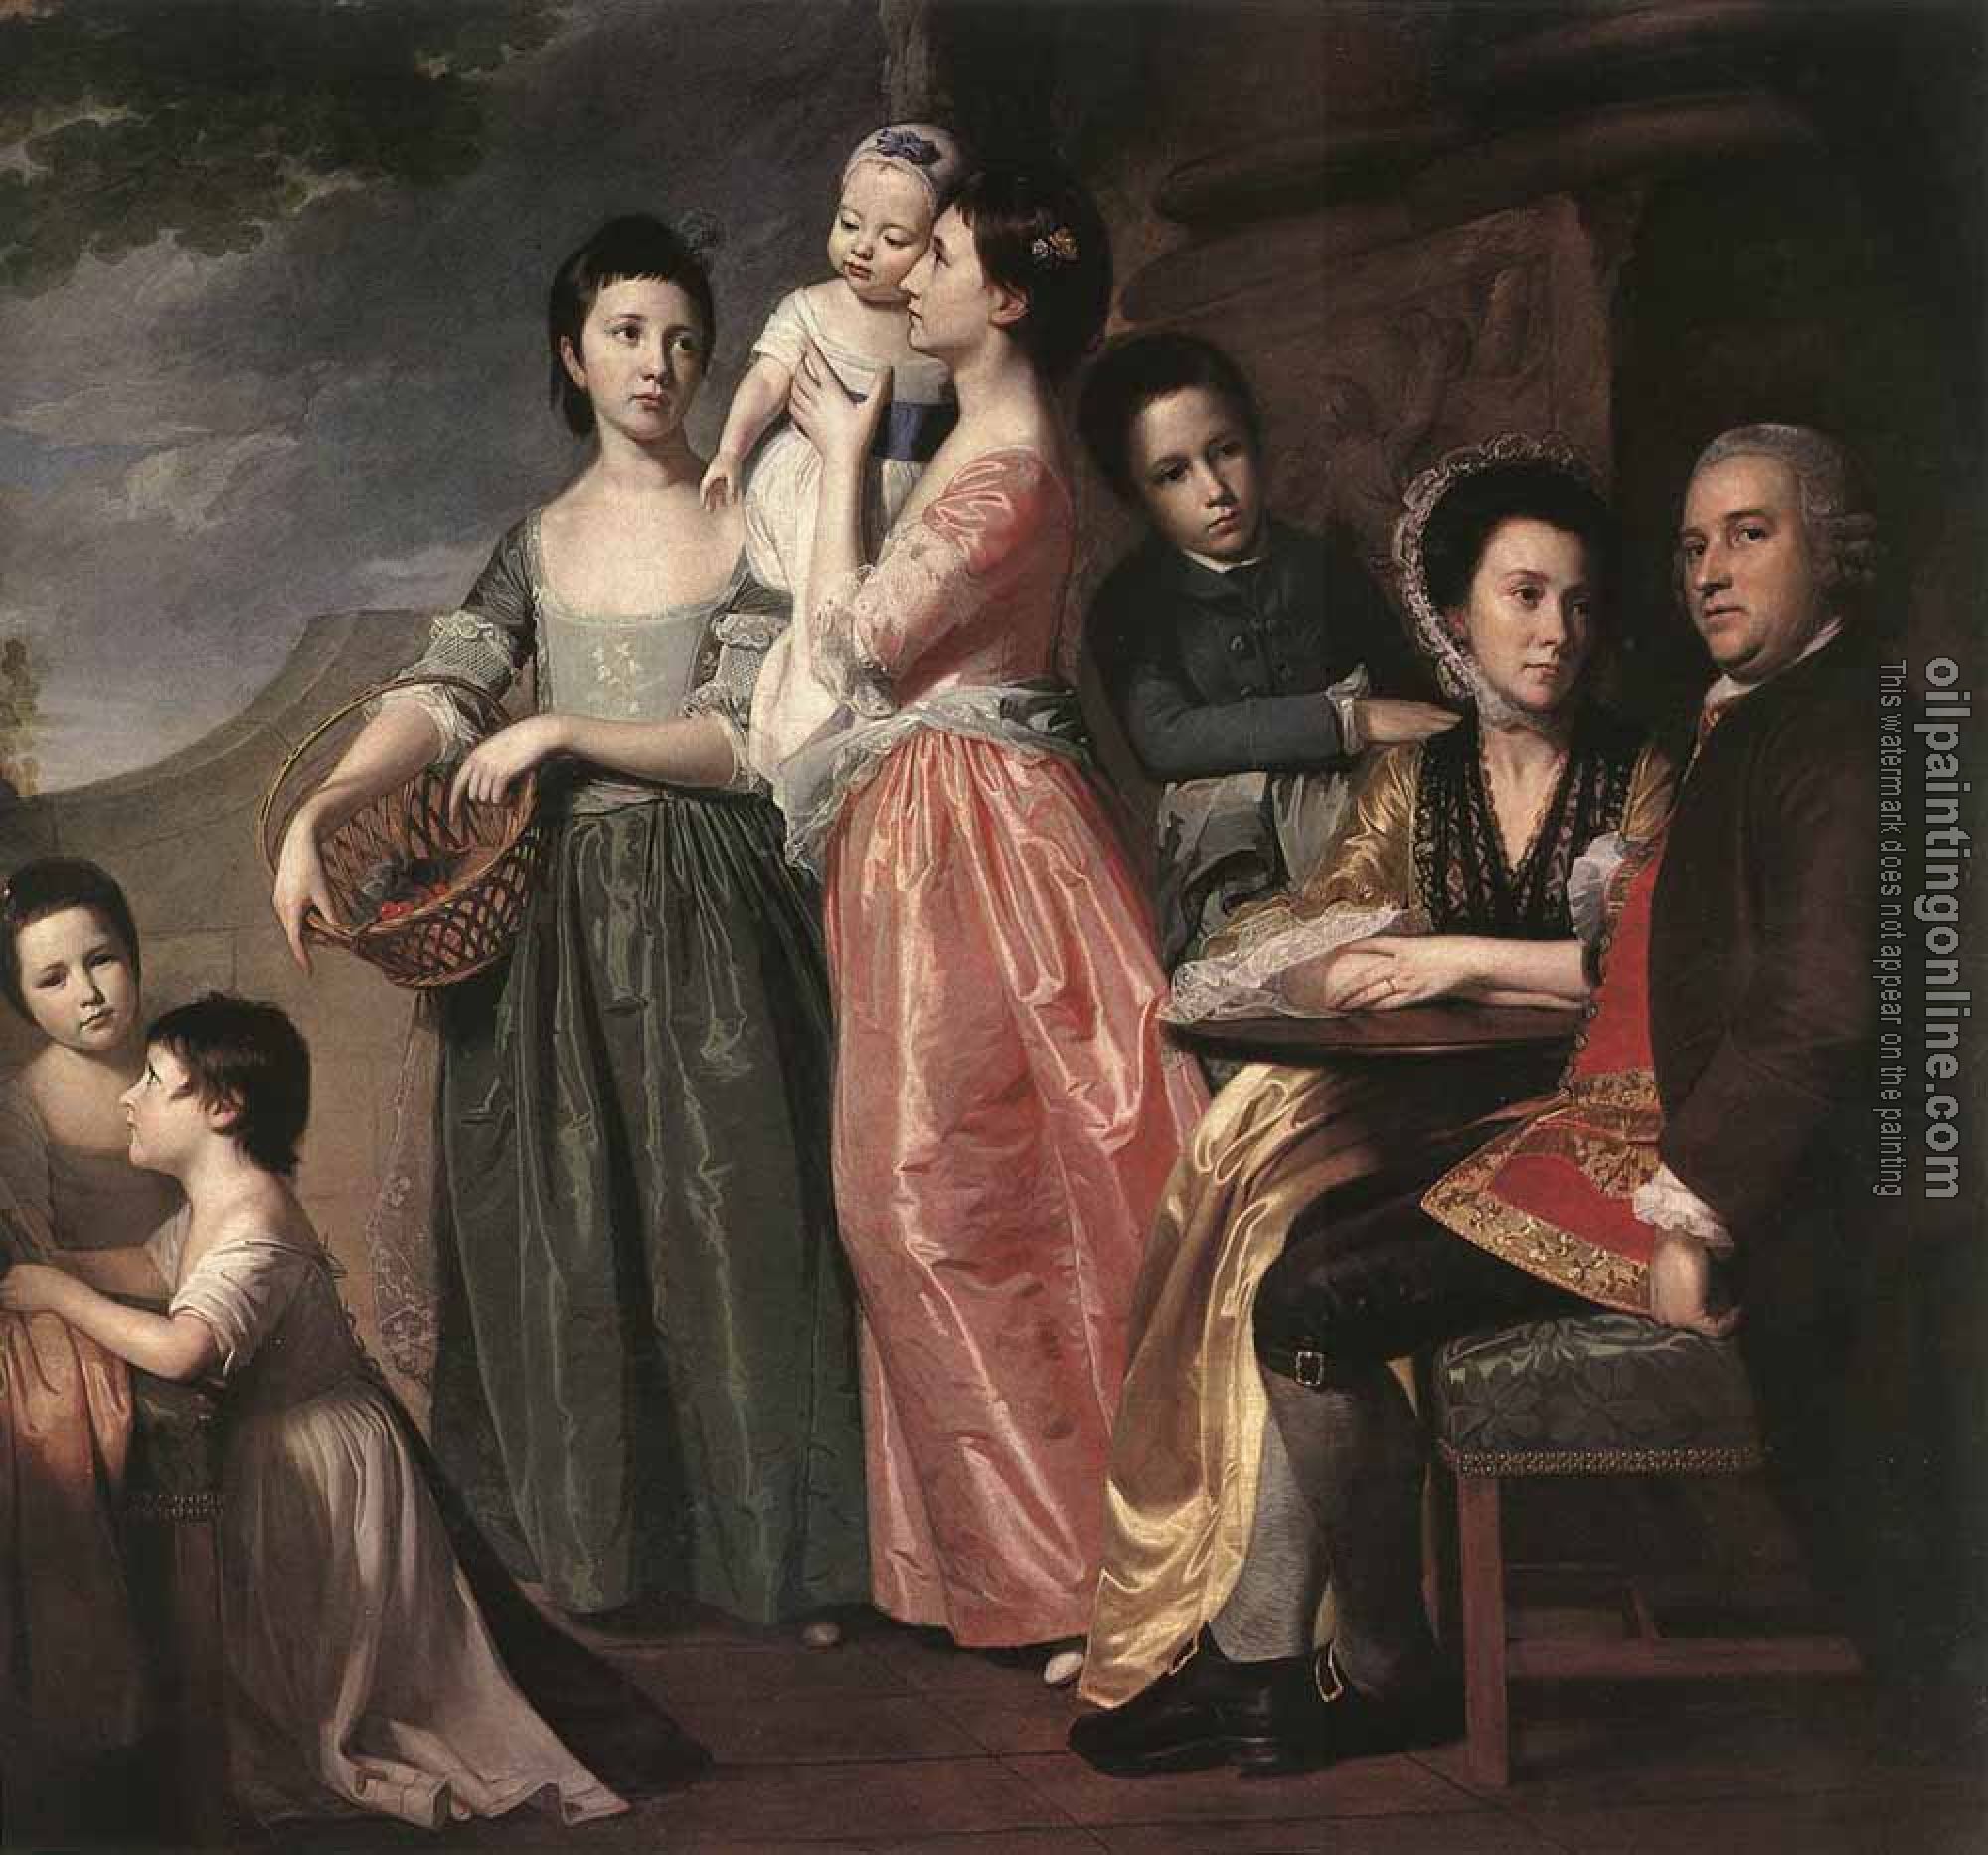 George Romney - The leigh Family